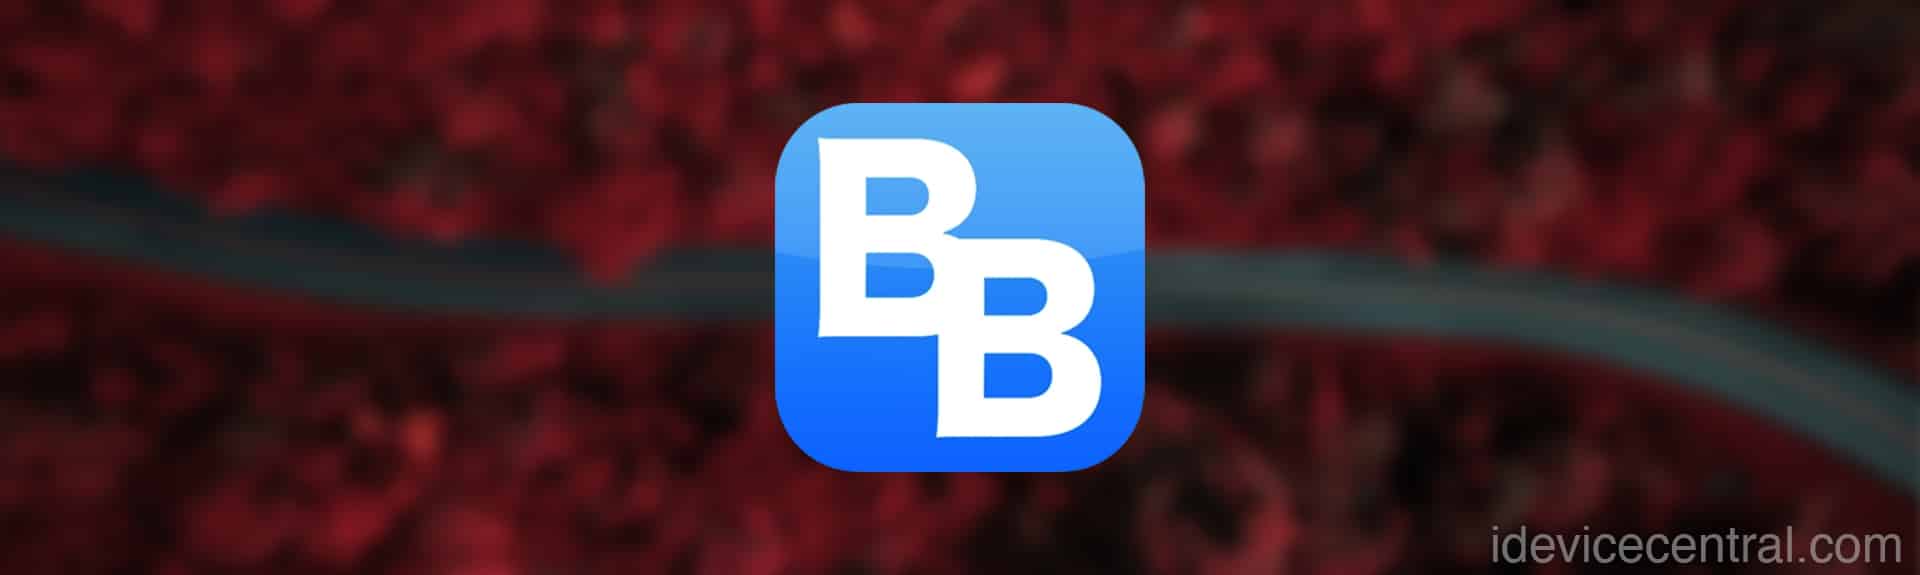 Add BigBoss Repository to Cydia, Sileo, Zebra or Installer 5 With One Tap